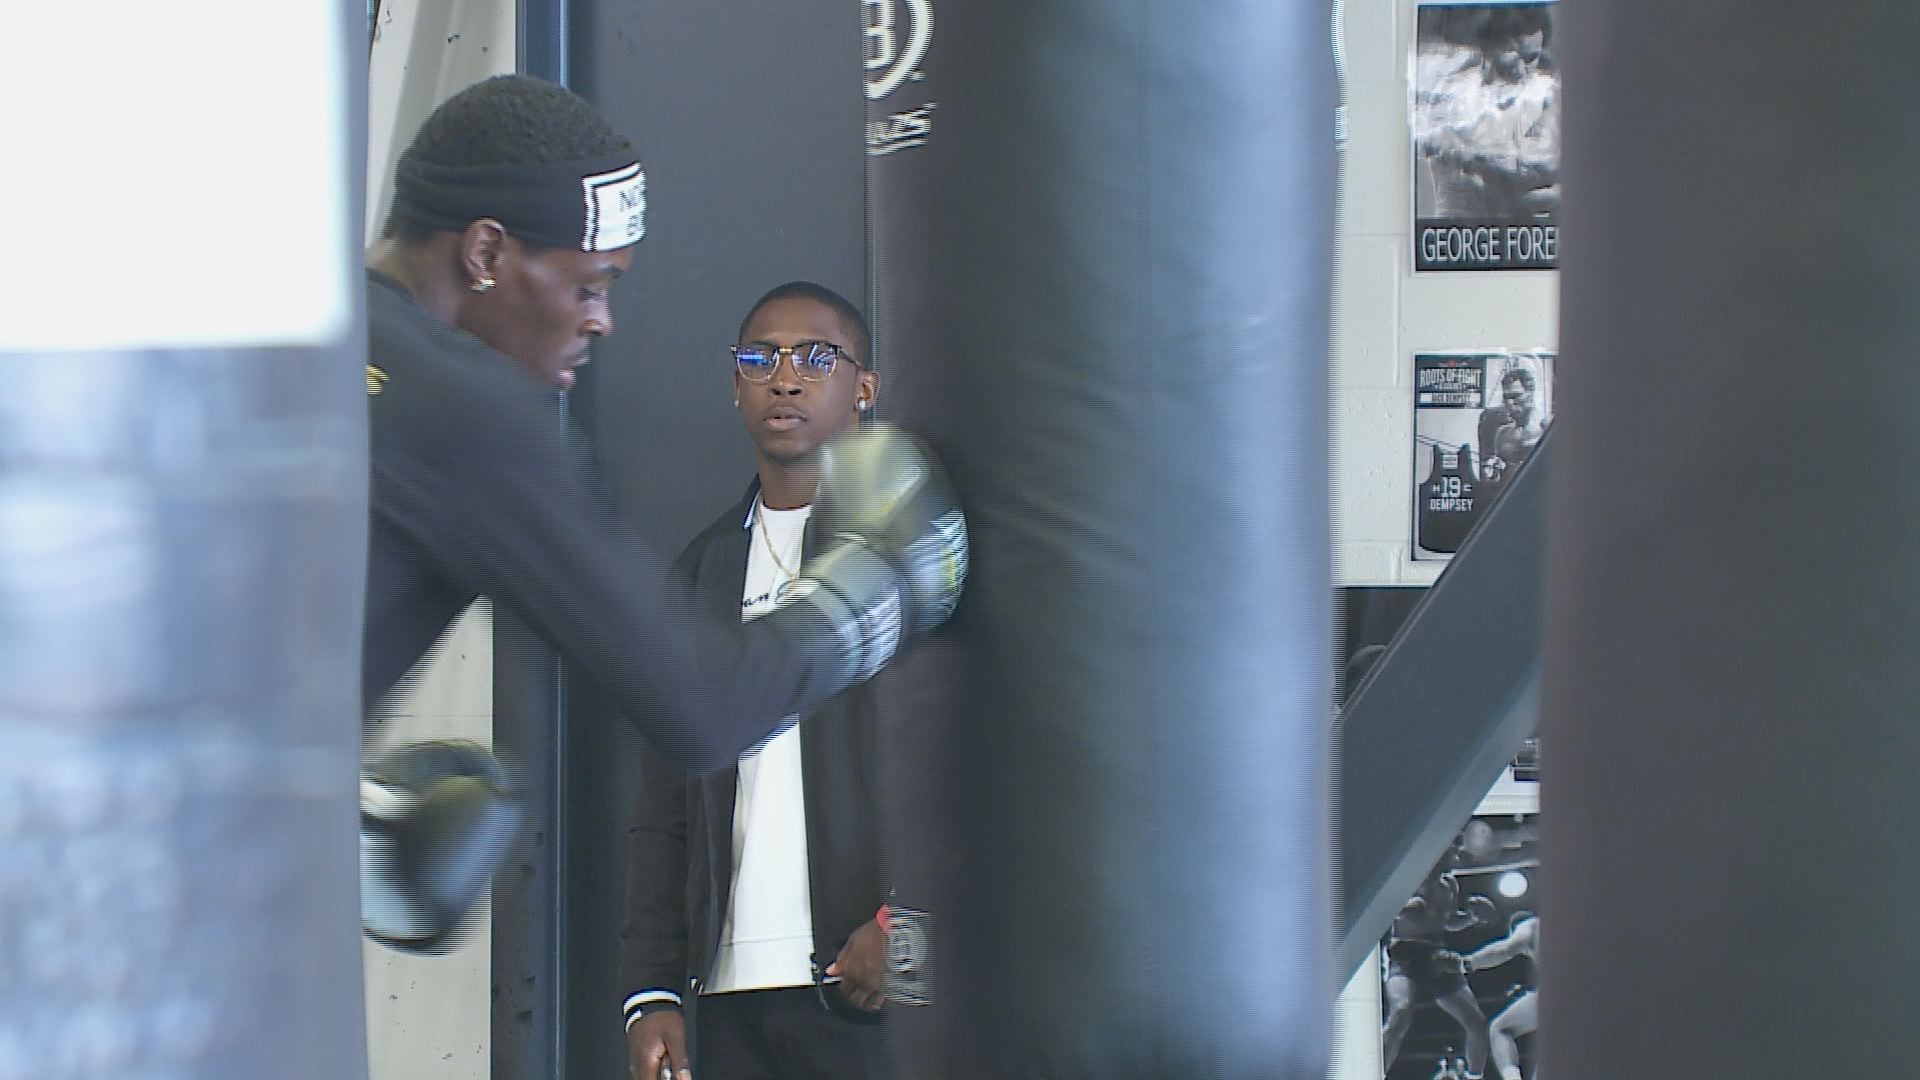 Kelvin Davis and his younger brother, Keyshawn will both compete in the U.S. Olympic boxing trials in December from Lake Charles, Louisiana.